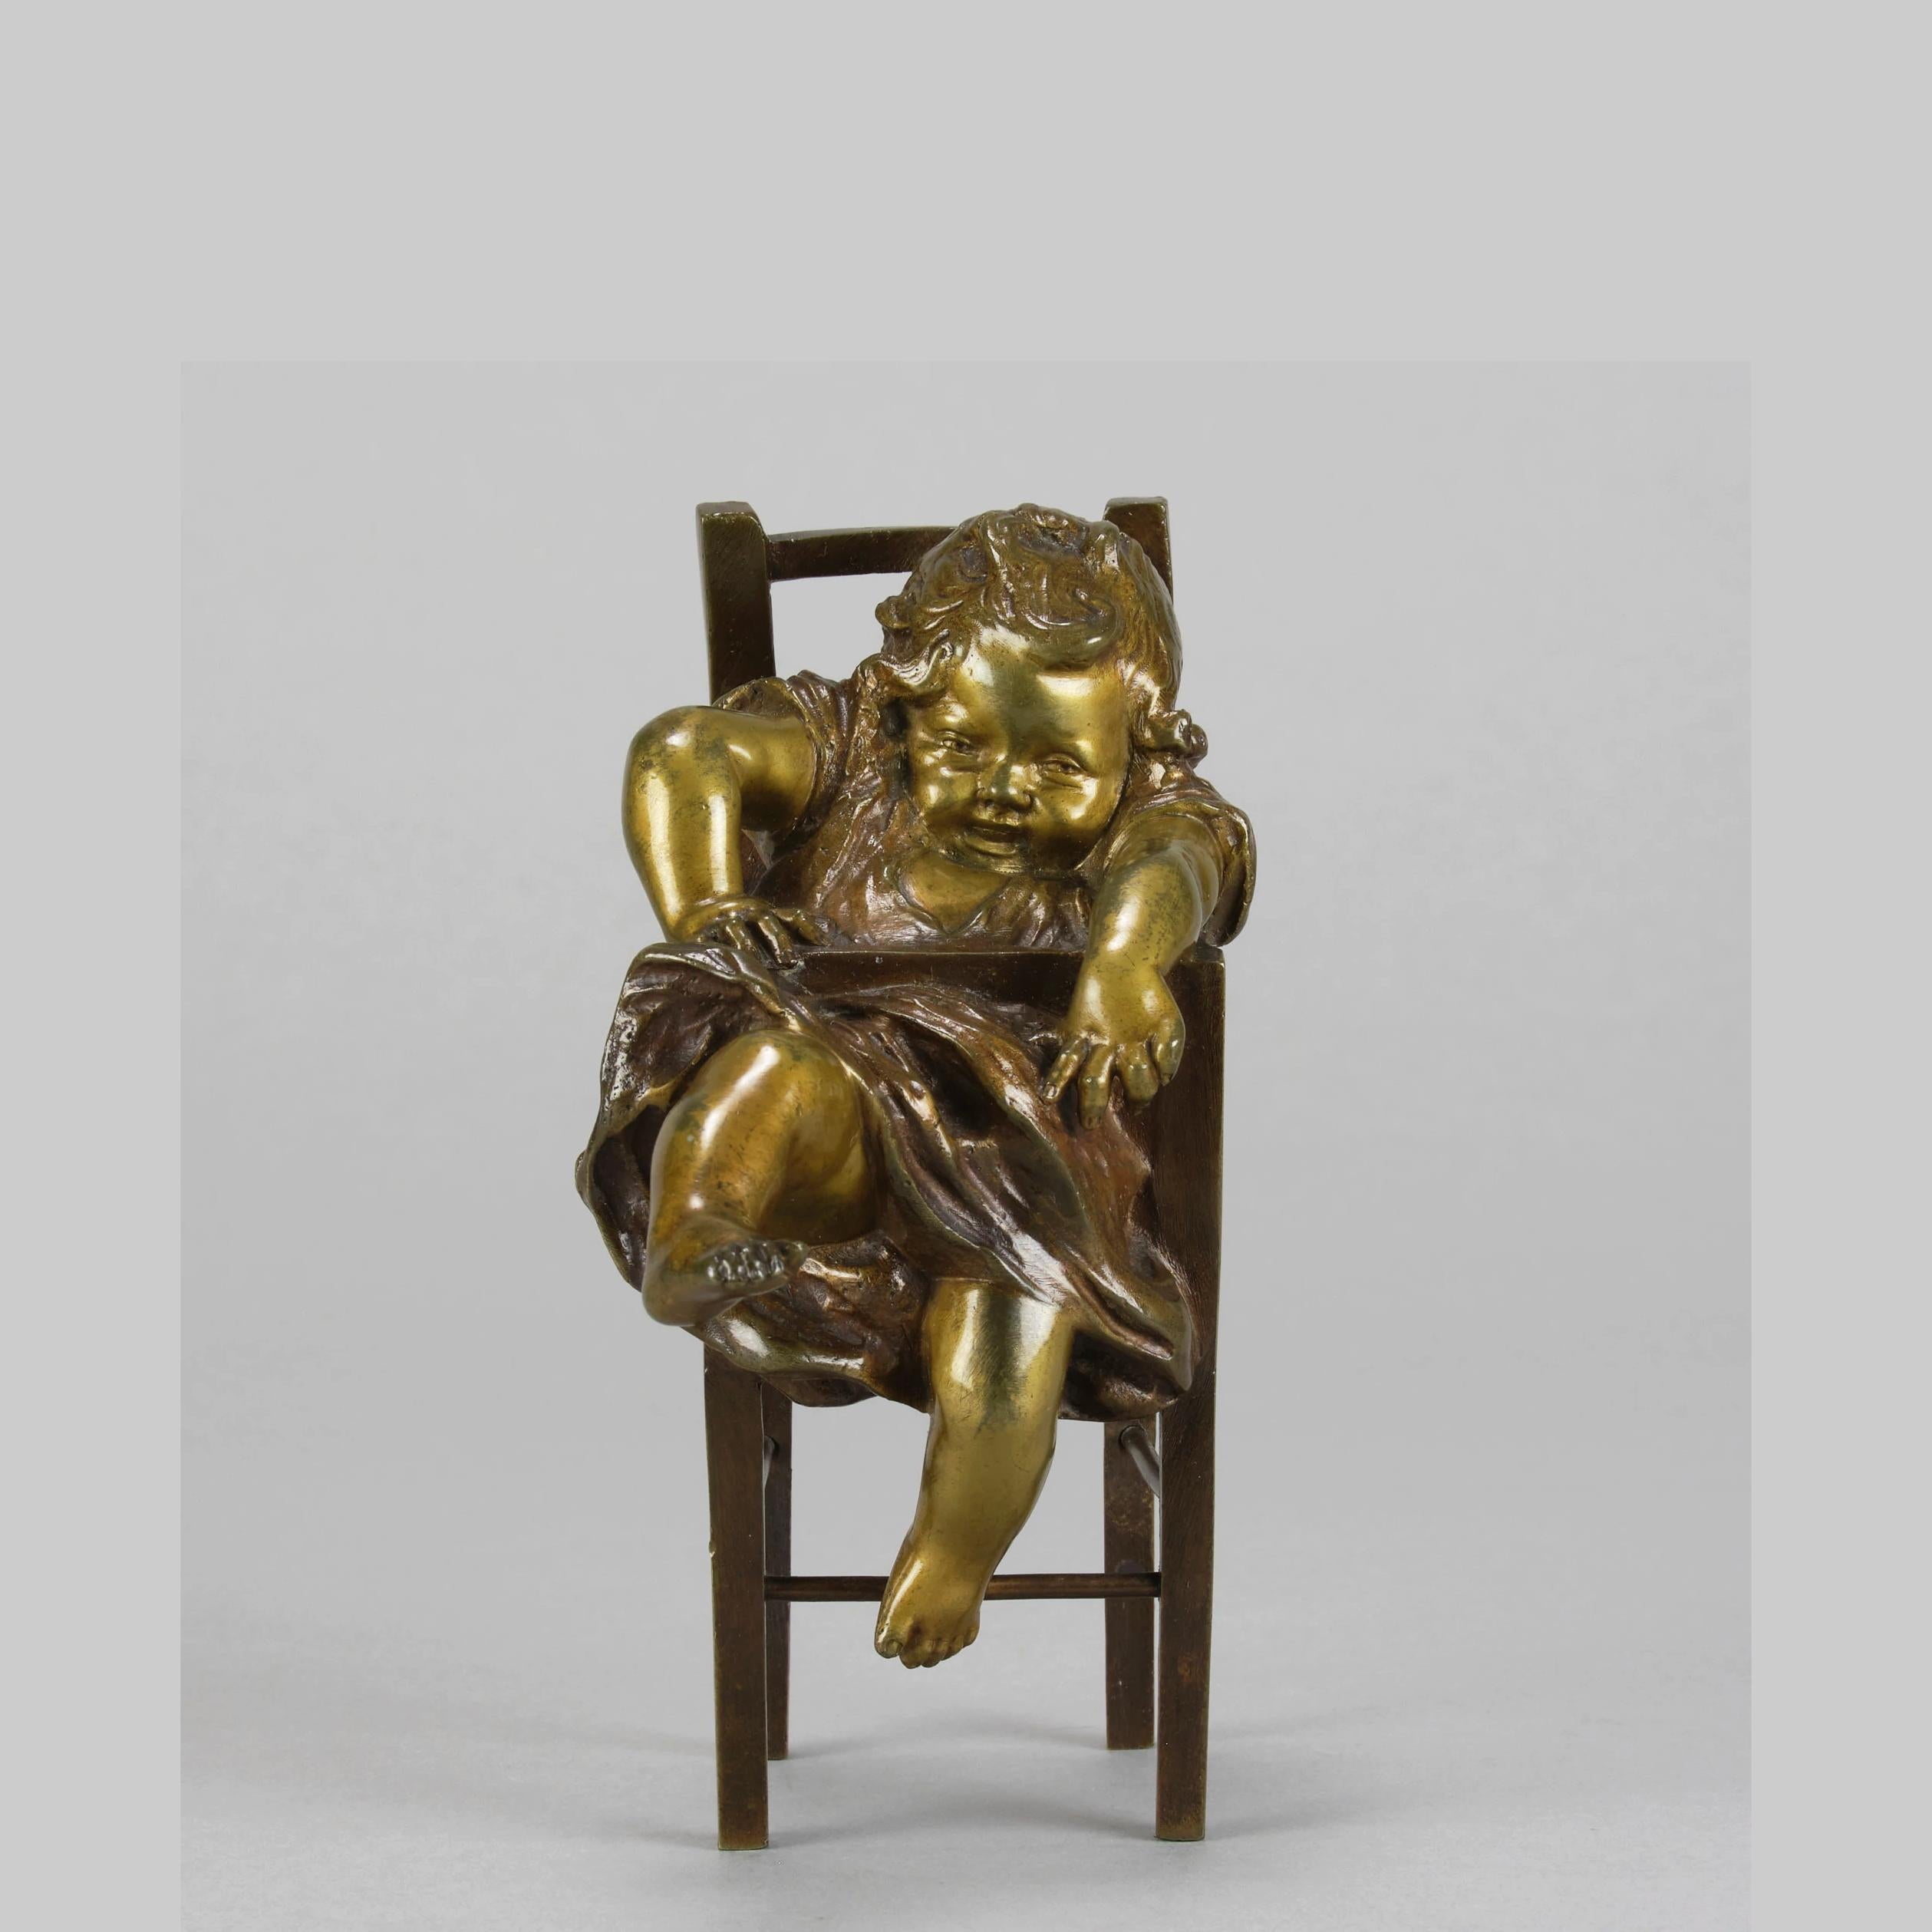 A charming early 20th Century Spanish bronze study depicting a young girl trying to escape from her high chair, exhibiting excellent rich brown and gilt patina and fine detail. Signed Juan Clara & numbered
ADDITIONAL INFORMATION

Height: 15